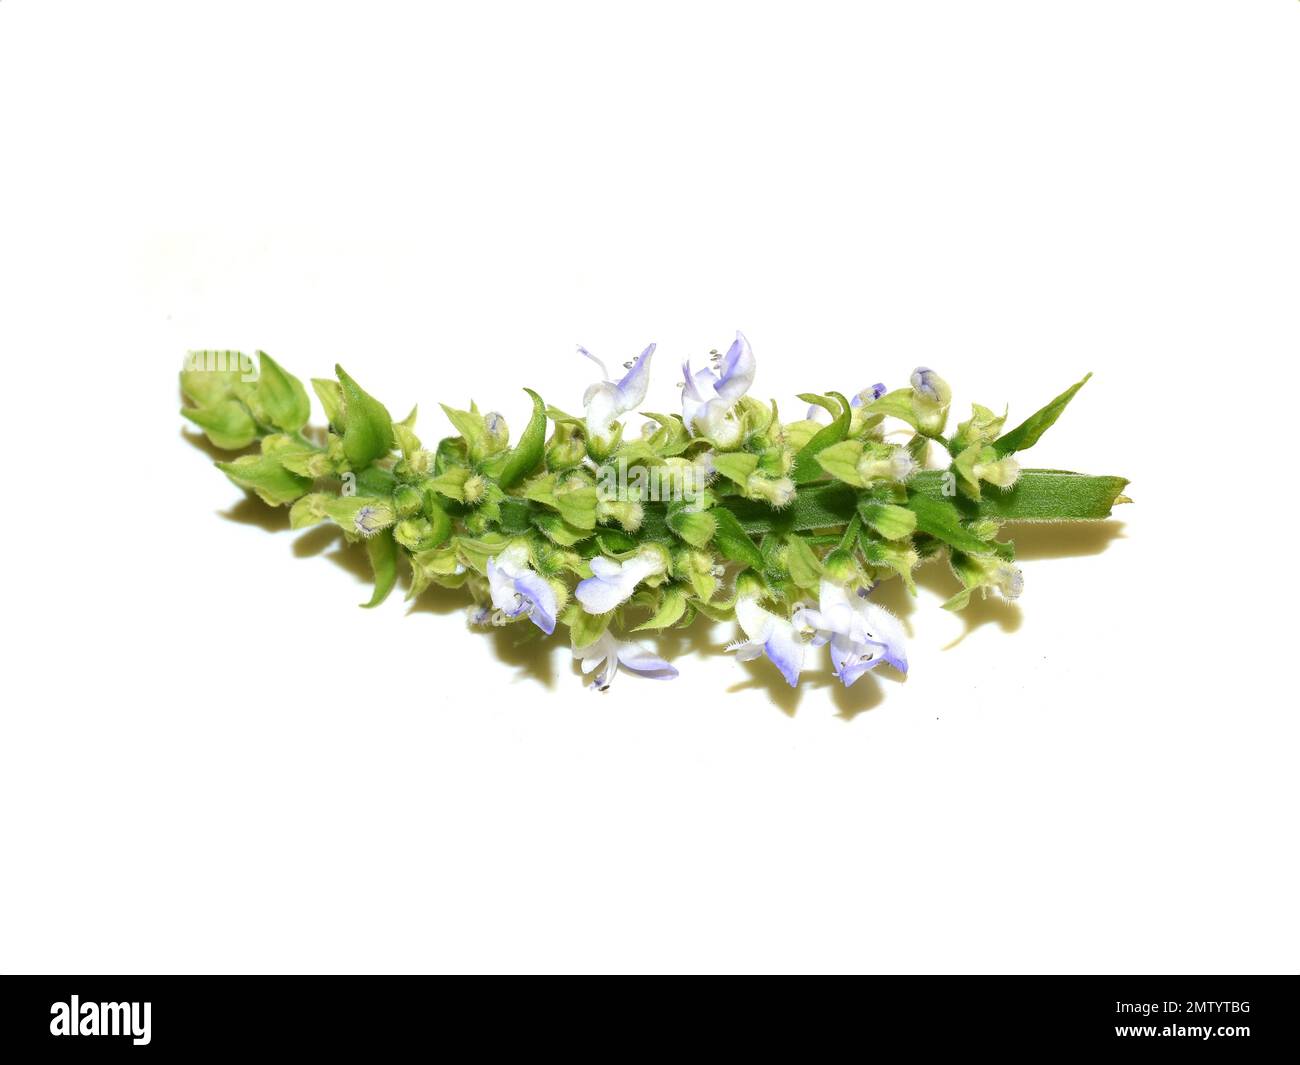 Blue flowers from a coleus plant isolated on white background Stock Photo